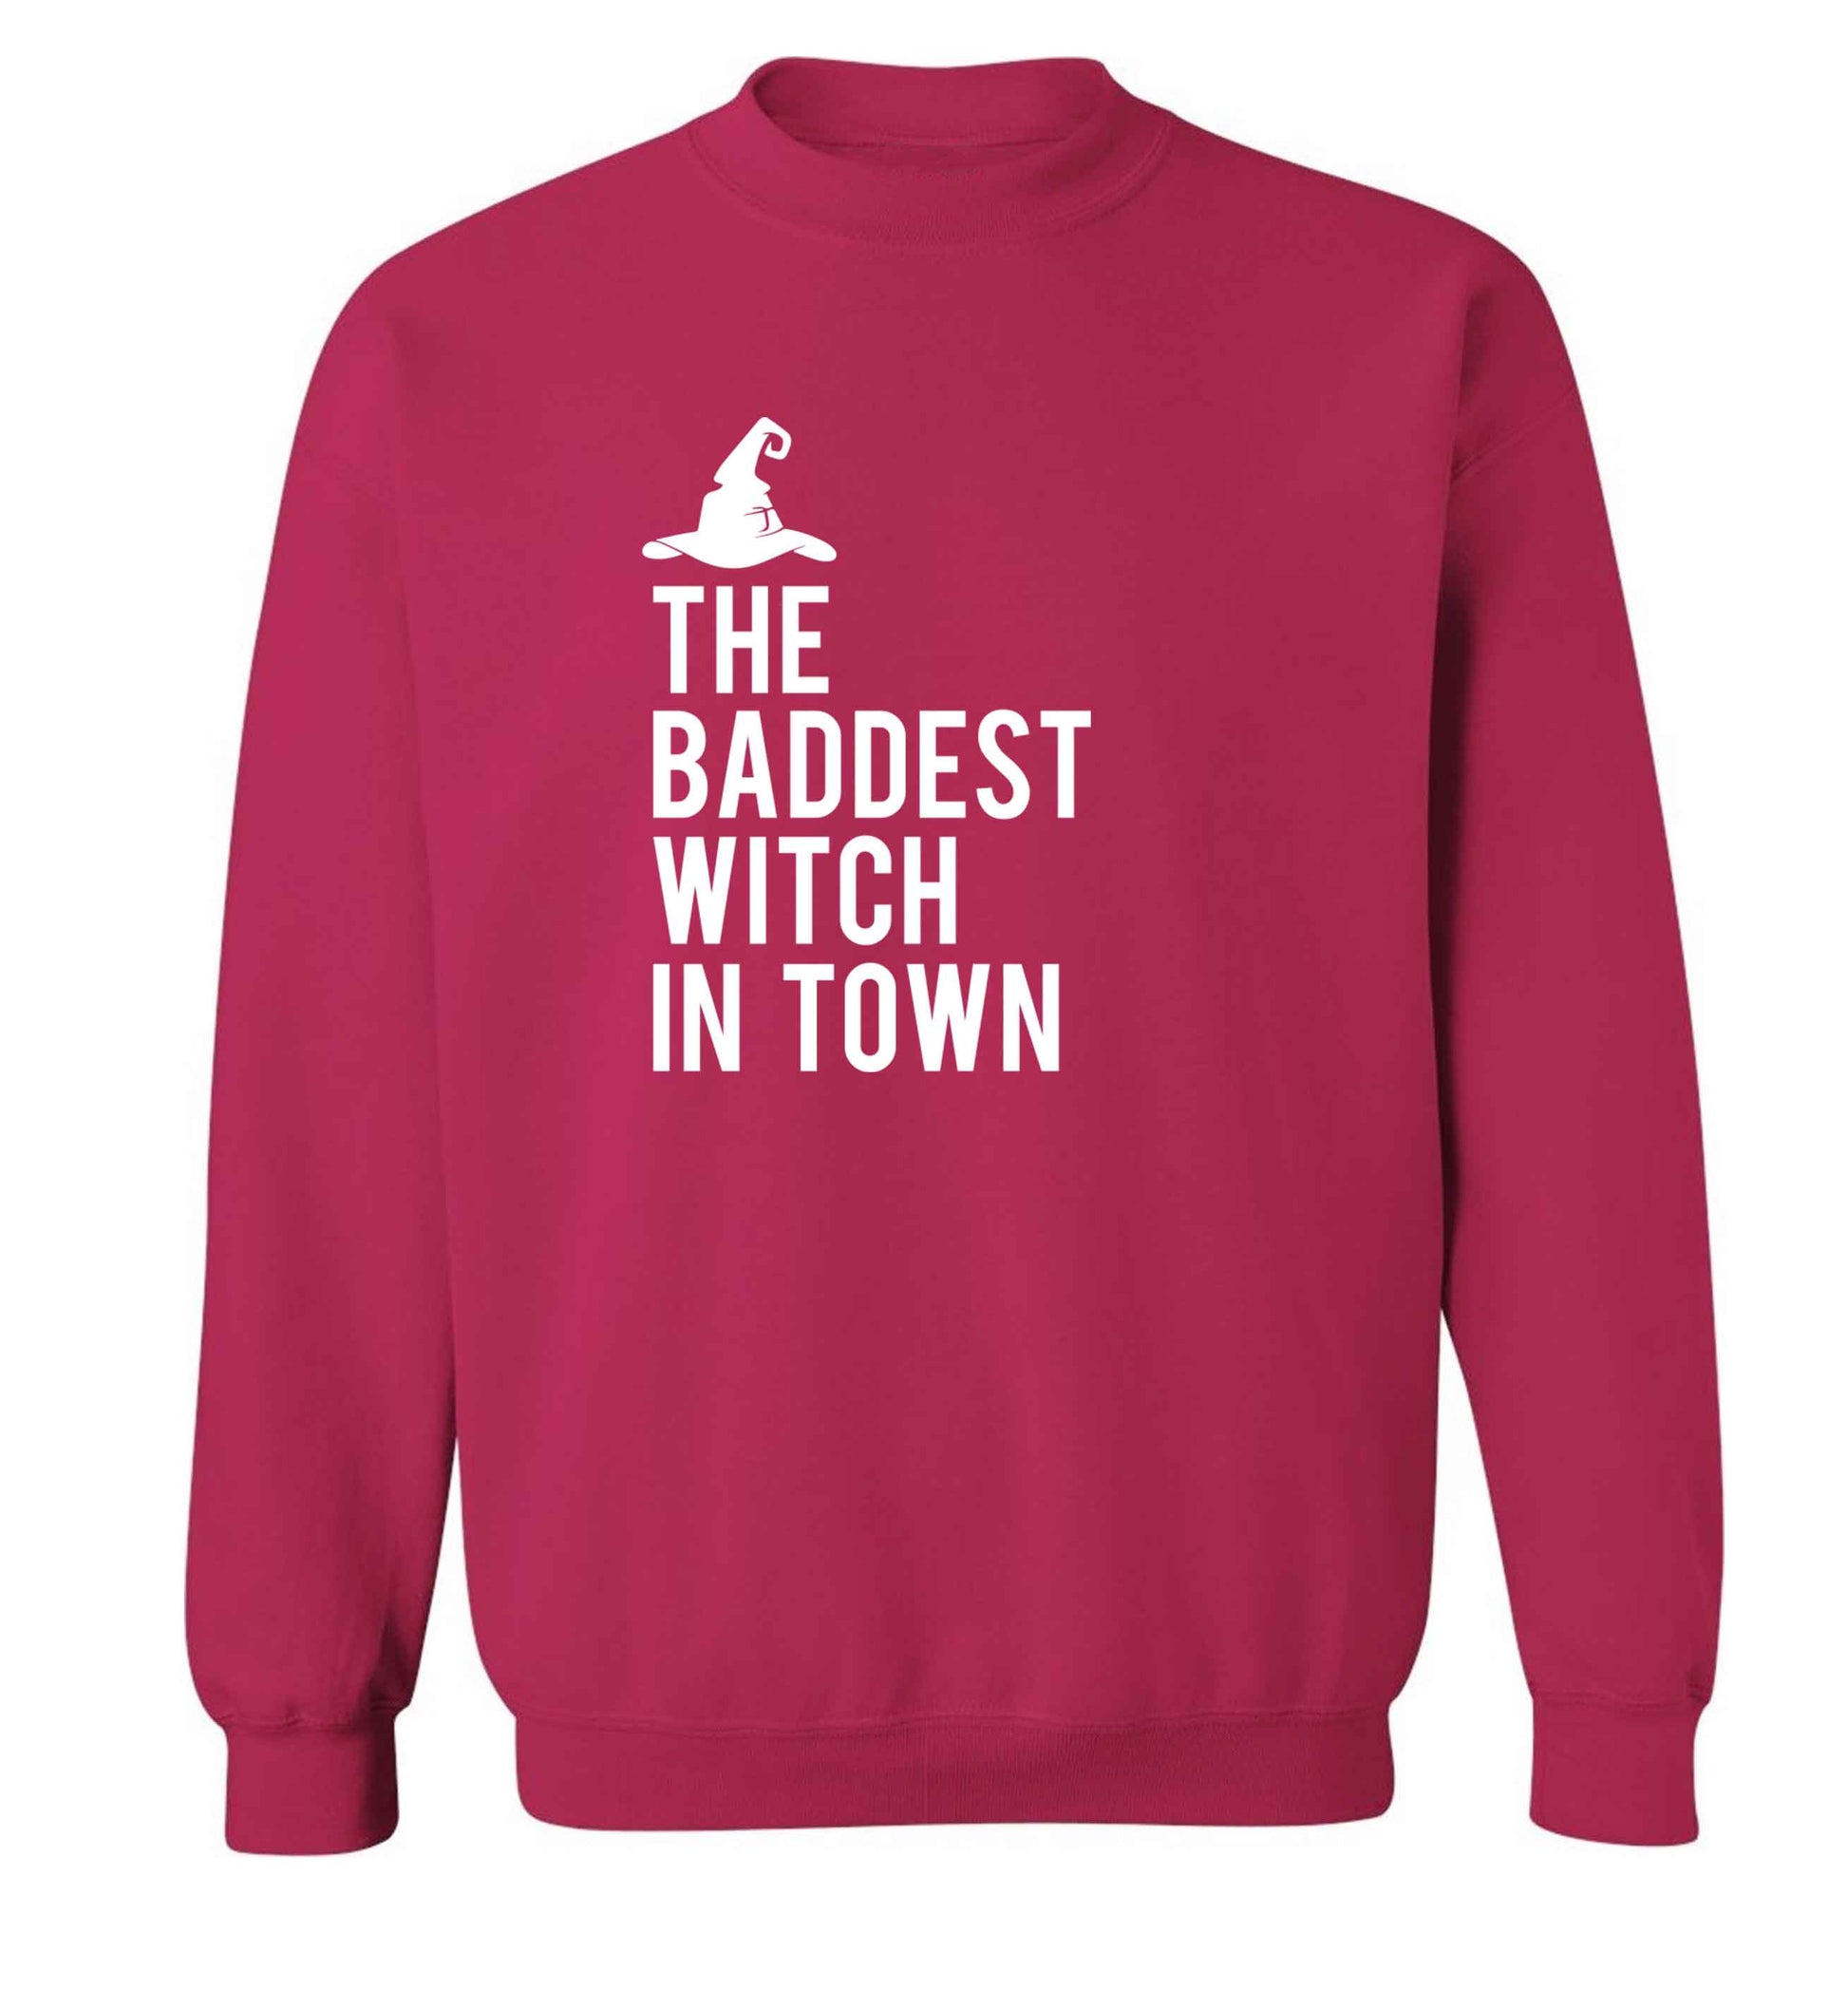 Badest witch in town adult's unisex pink sweater 2XL